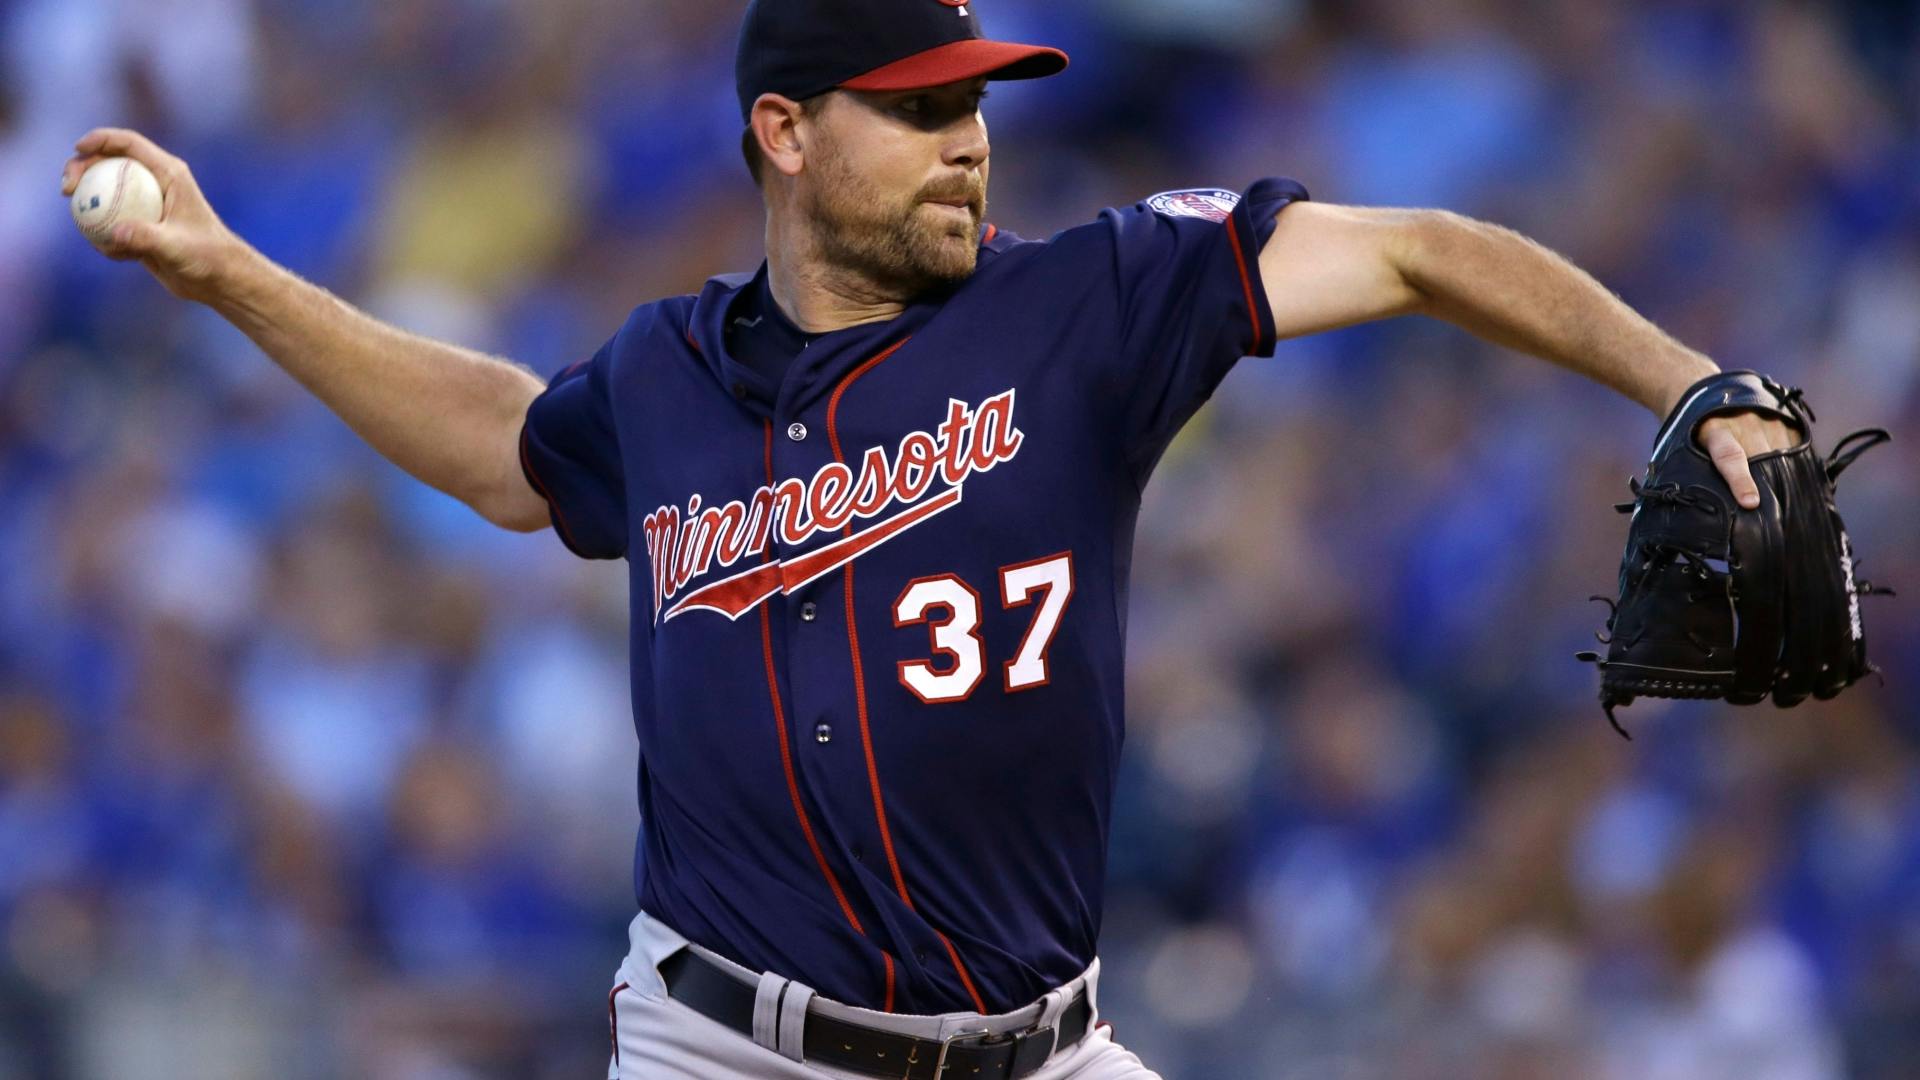 Twins righthander Mike Pelfrey says he's not thinking about whether he'll keep his spot in the rotation, but while he was OK Wednesday, "I know I still have to be better."